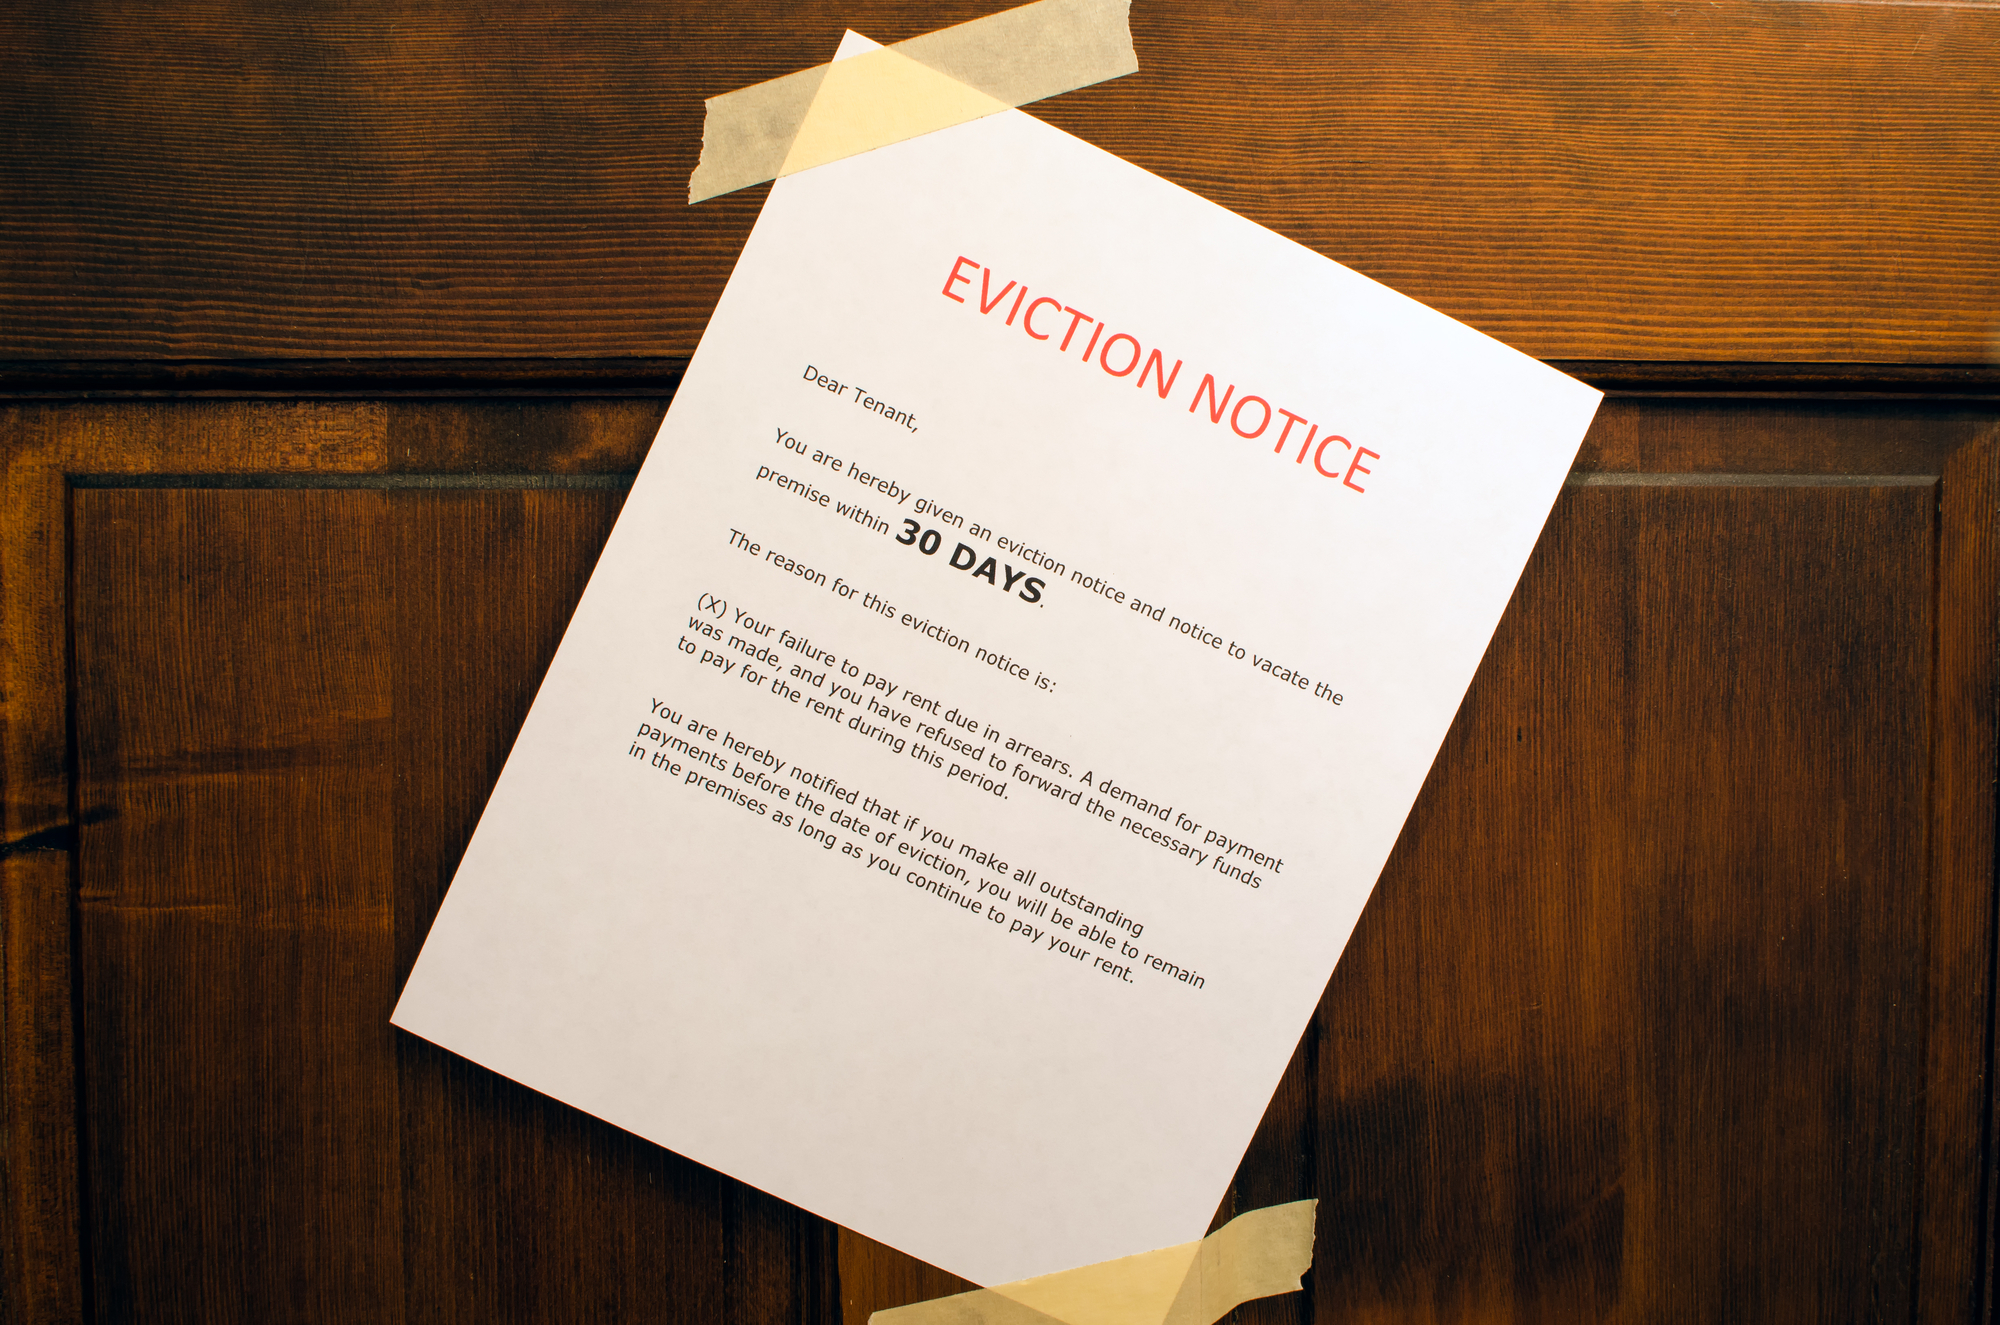 How to Evict a Tenant